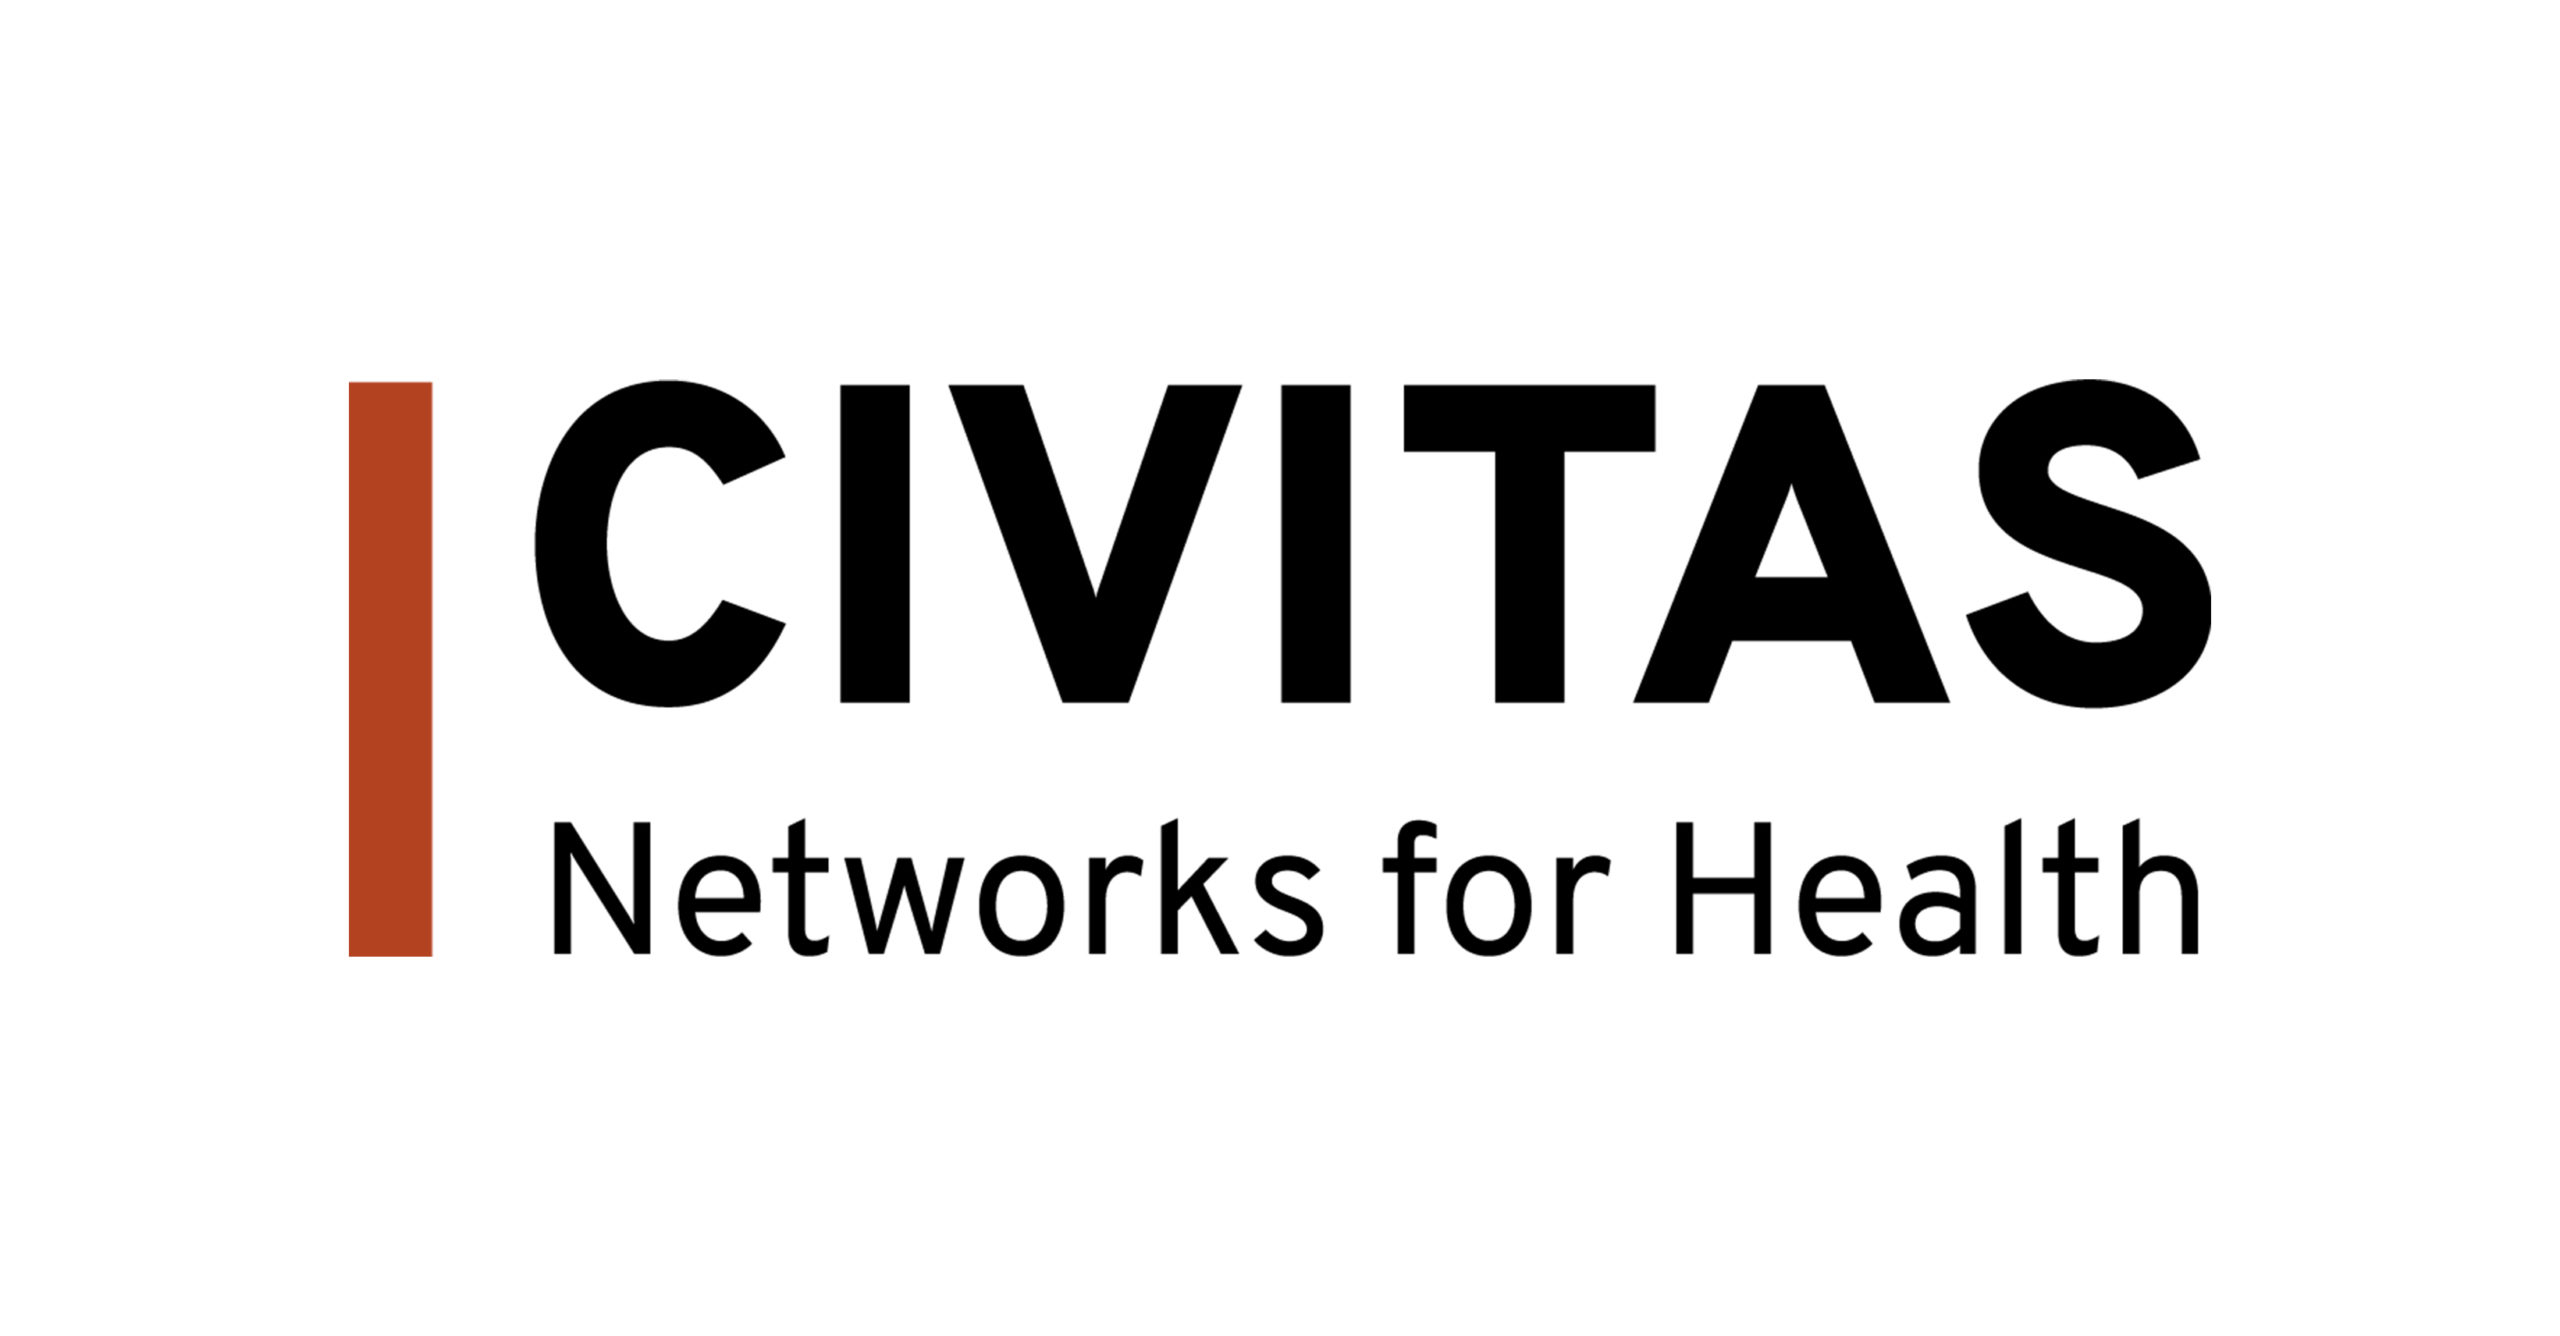 2023 Annual Conference - Civitas Networks for Health